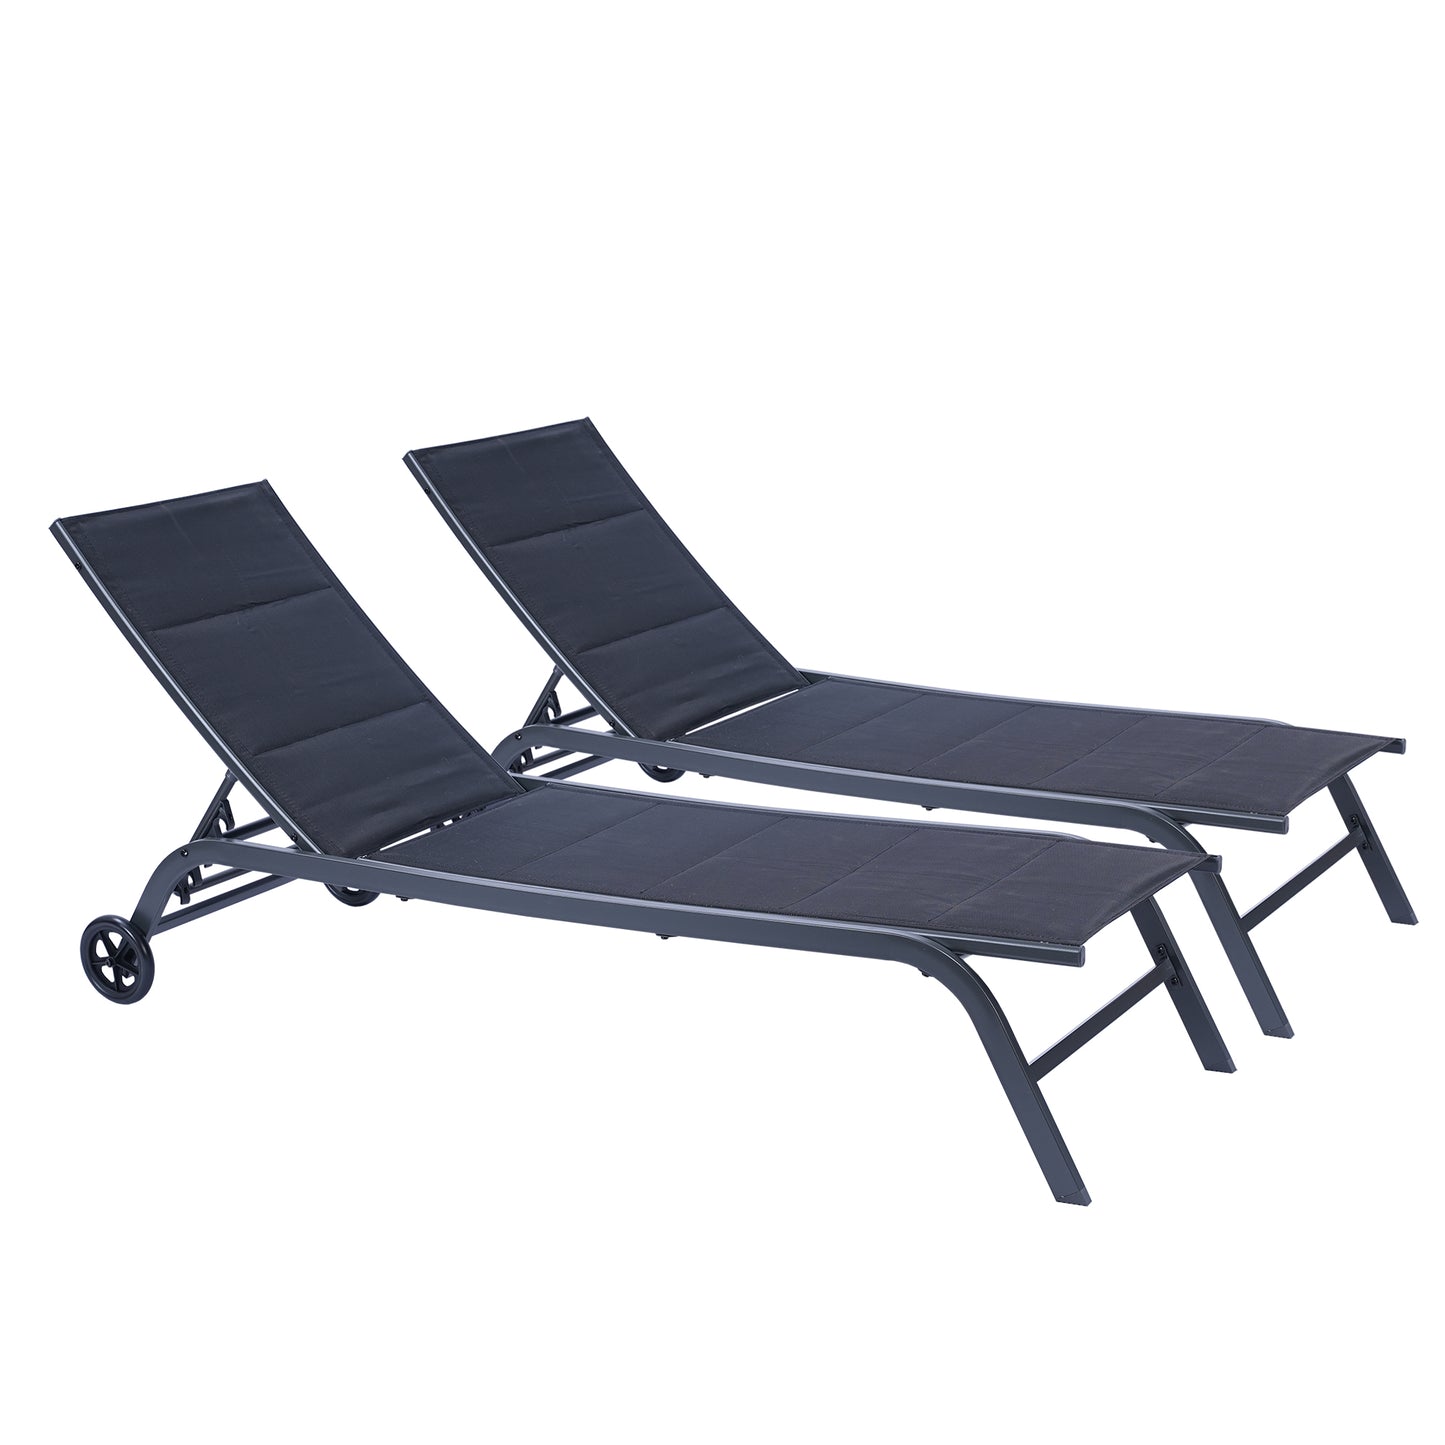 Outdoor 2-Pcs Set Chaise Lounge Chairs, Five-Position Adjustable Metal Recliner， Black